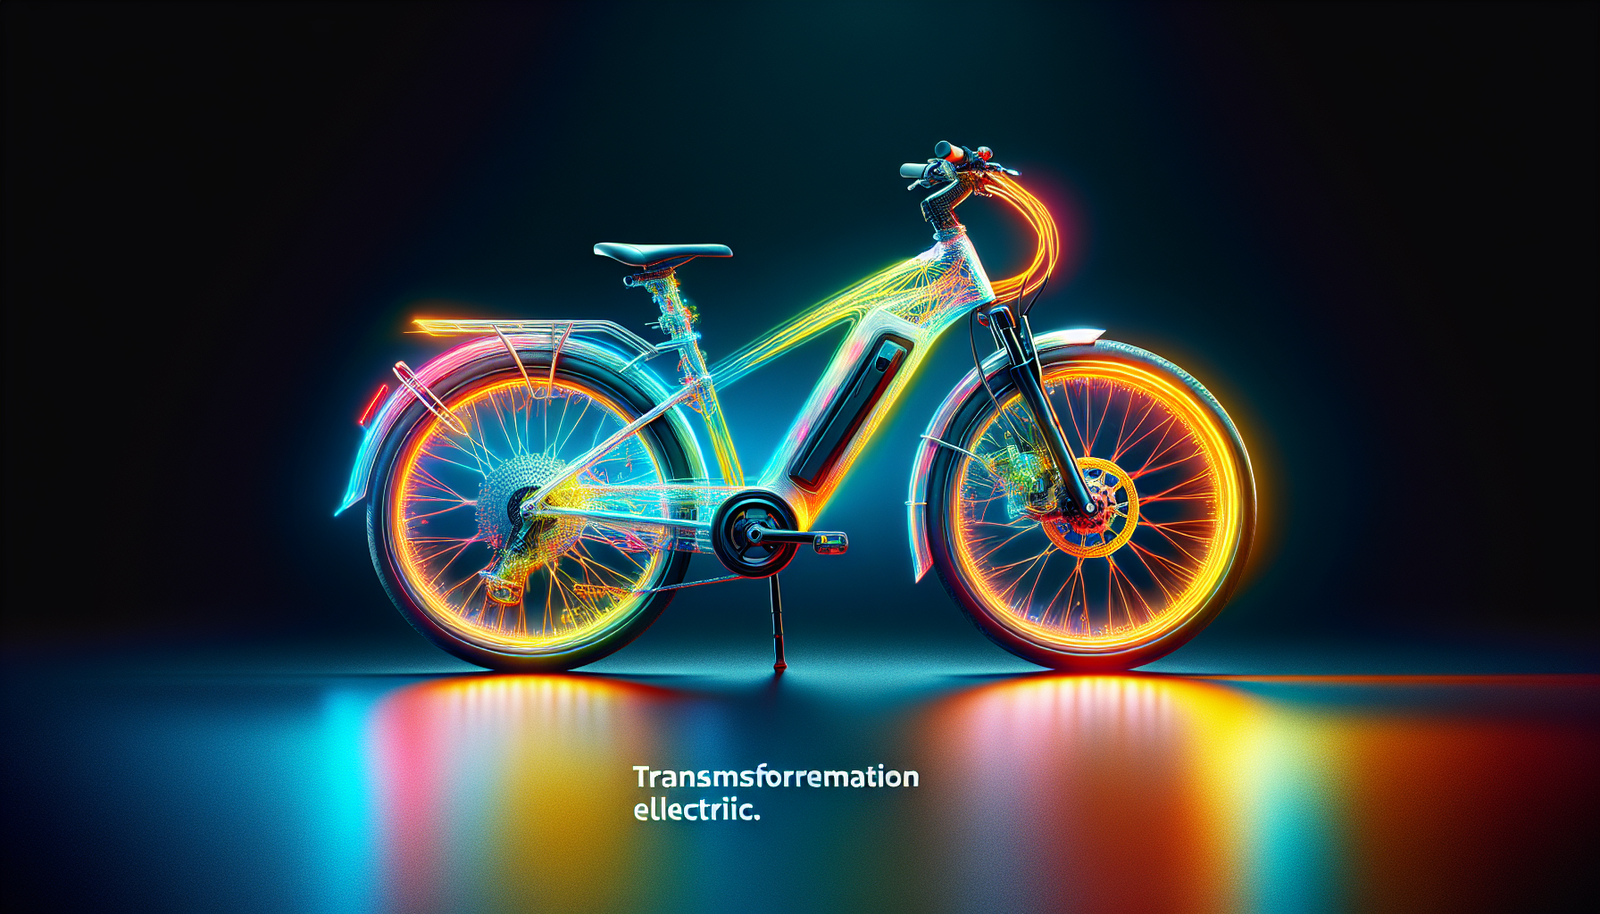 280 million electric bikes and mopeds reduce oil demand significantly